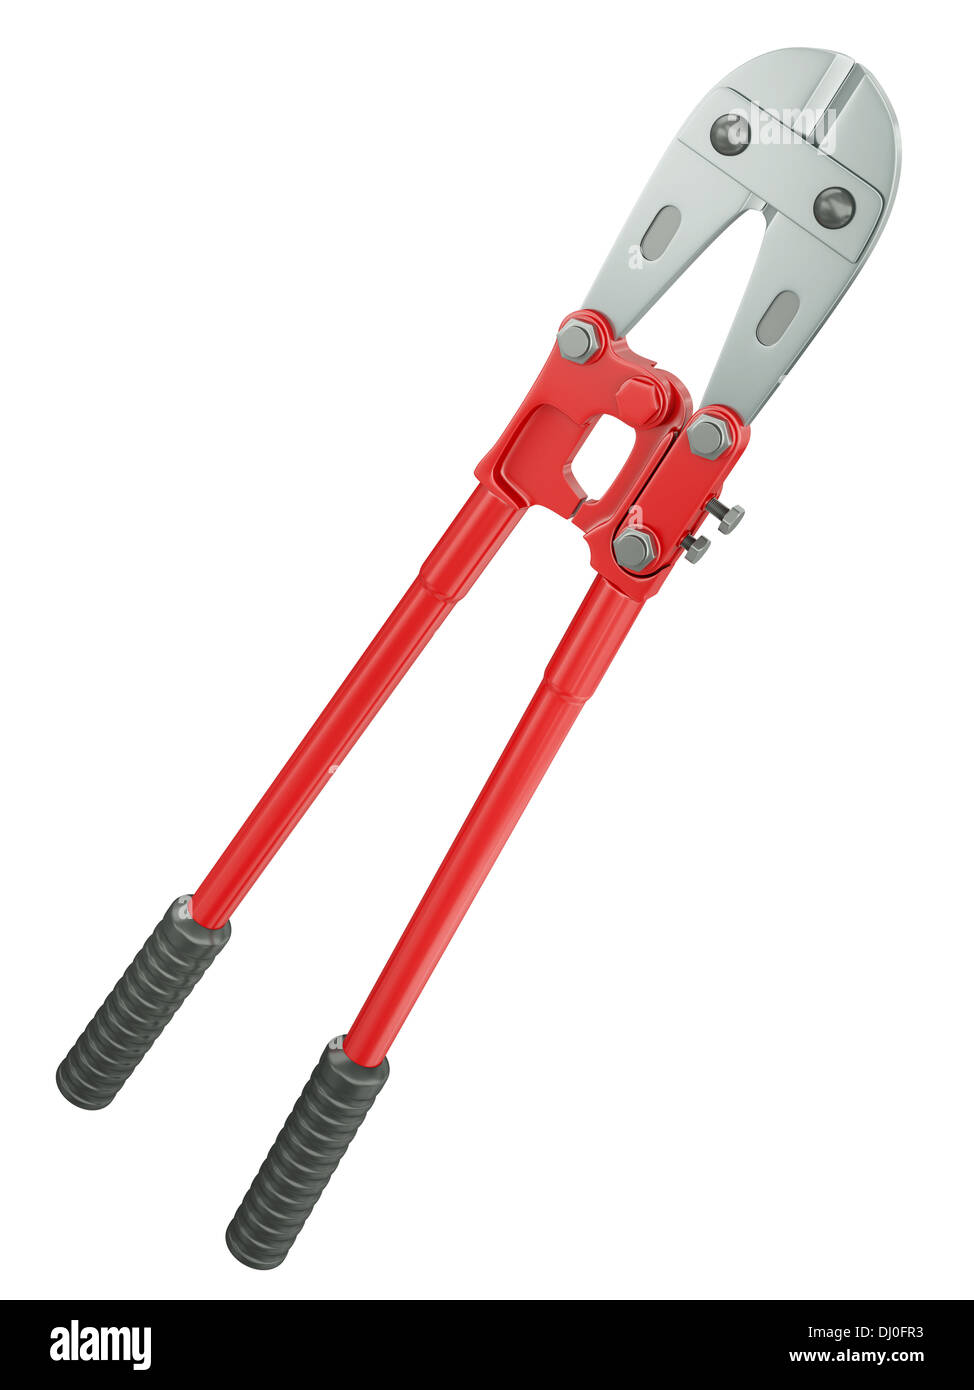 Red bolt cutter isolated on a white background. 3D rendered illustration. Stock Photo